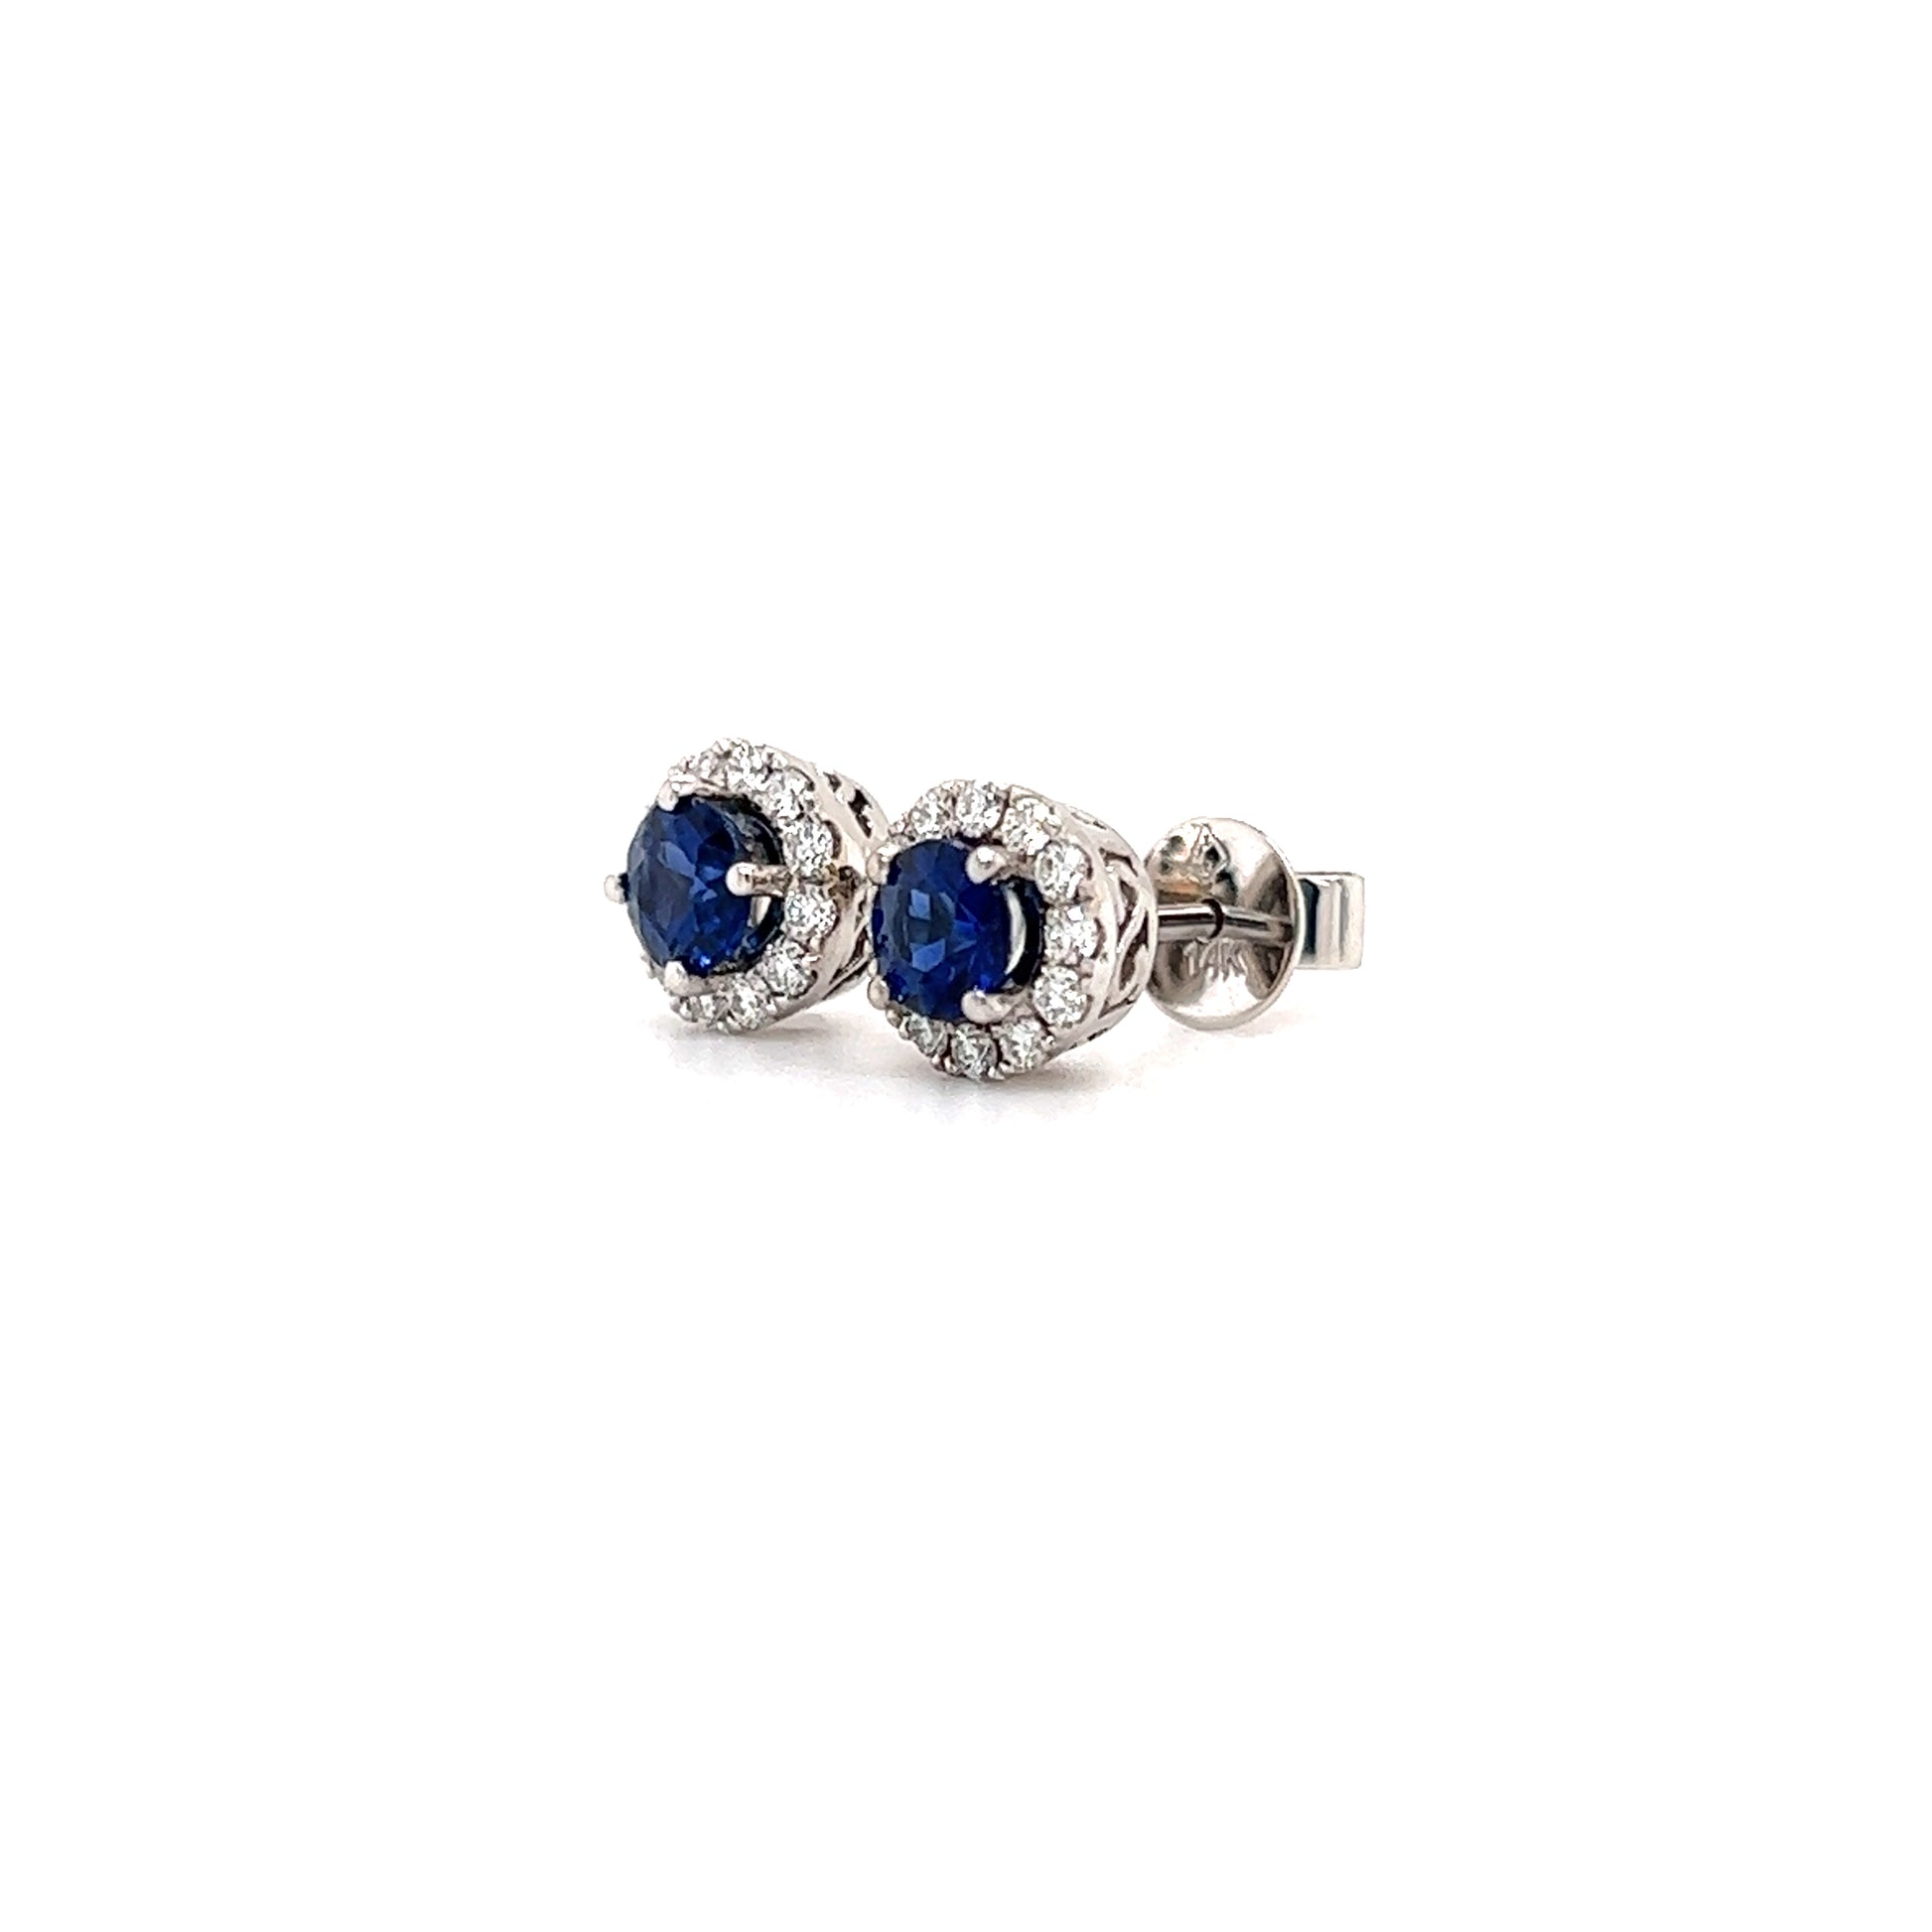 Blue Sapphire Stud Earrings with Diamond Halo in 14K White Gold Right Side View